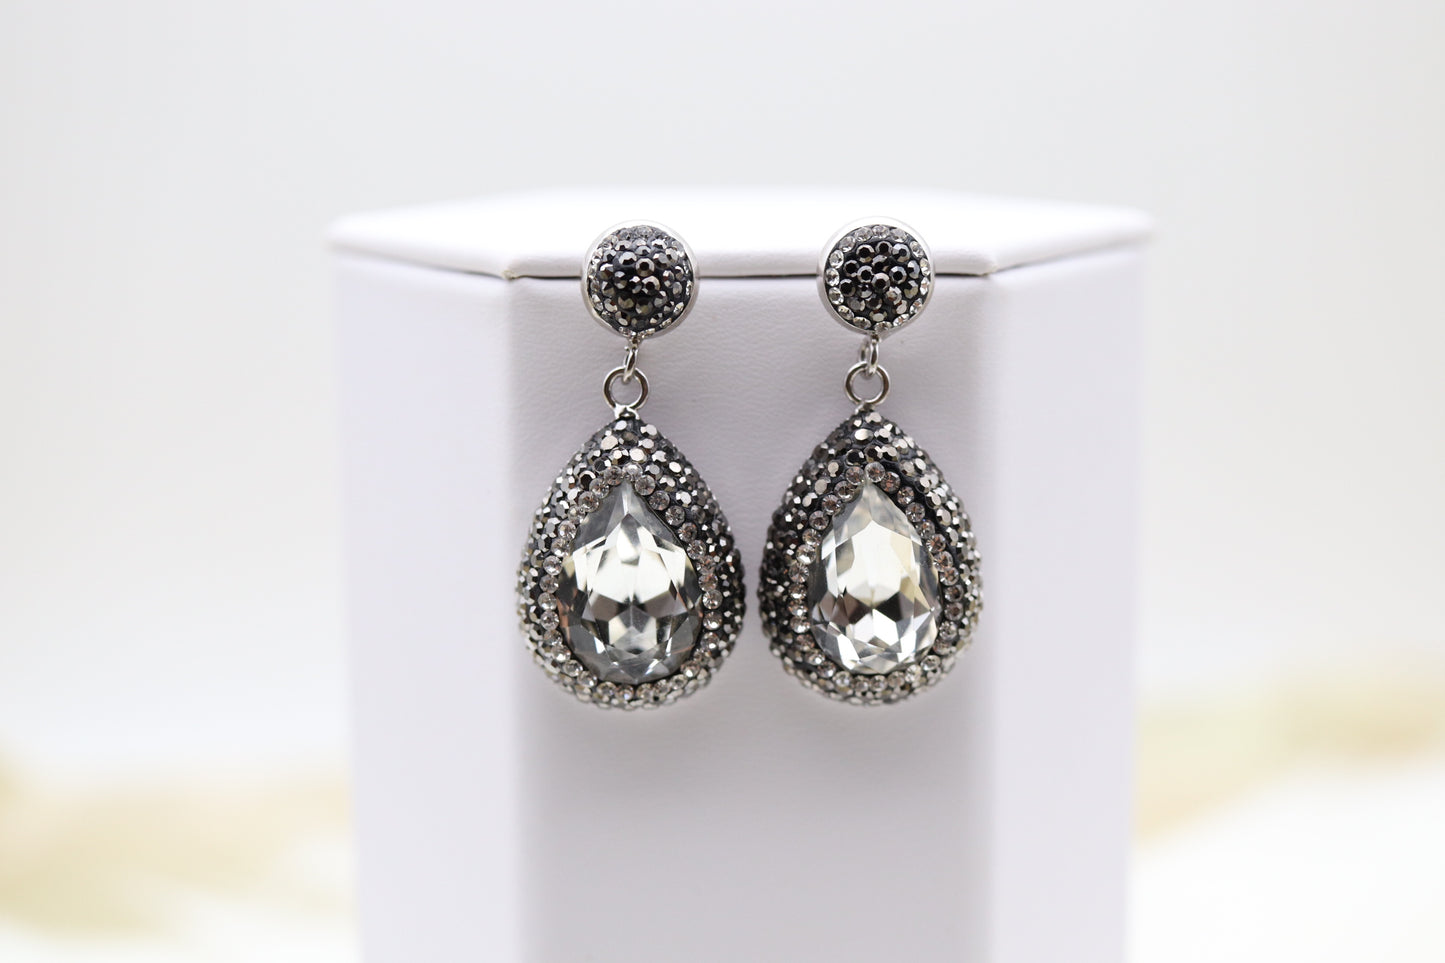 Matching Necklace and Earrings With Pear Shaped Clear Faceted CZ Stones